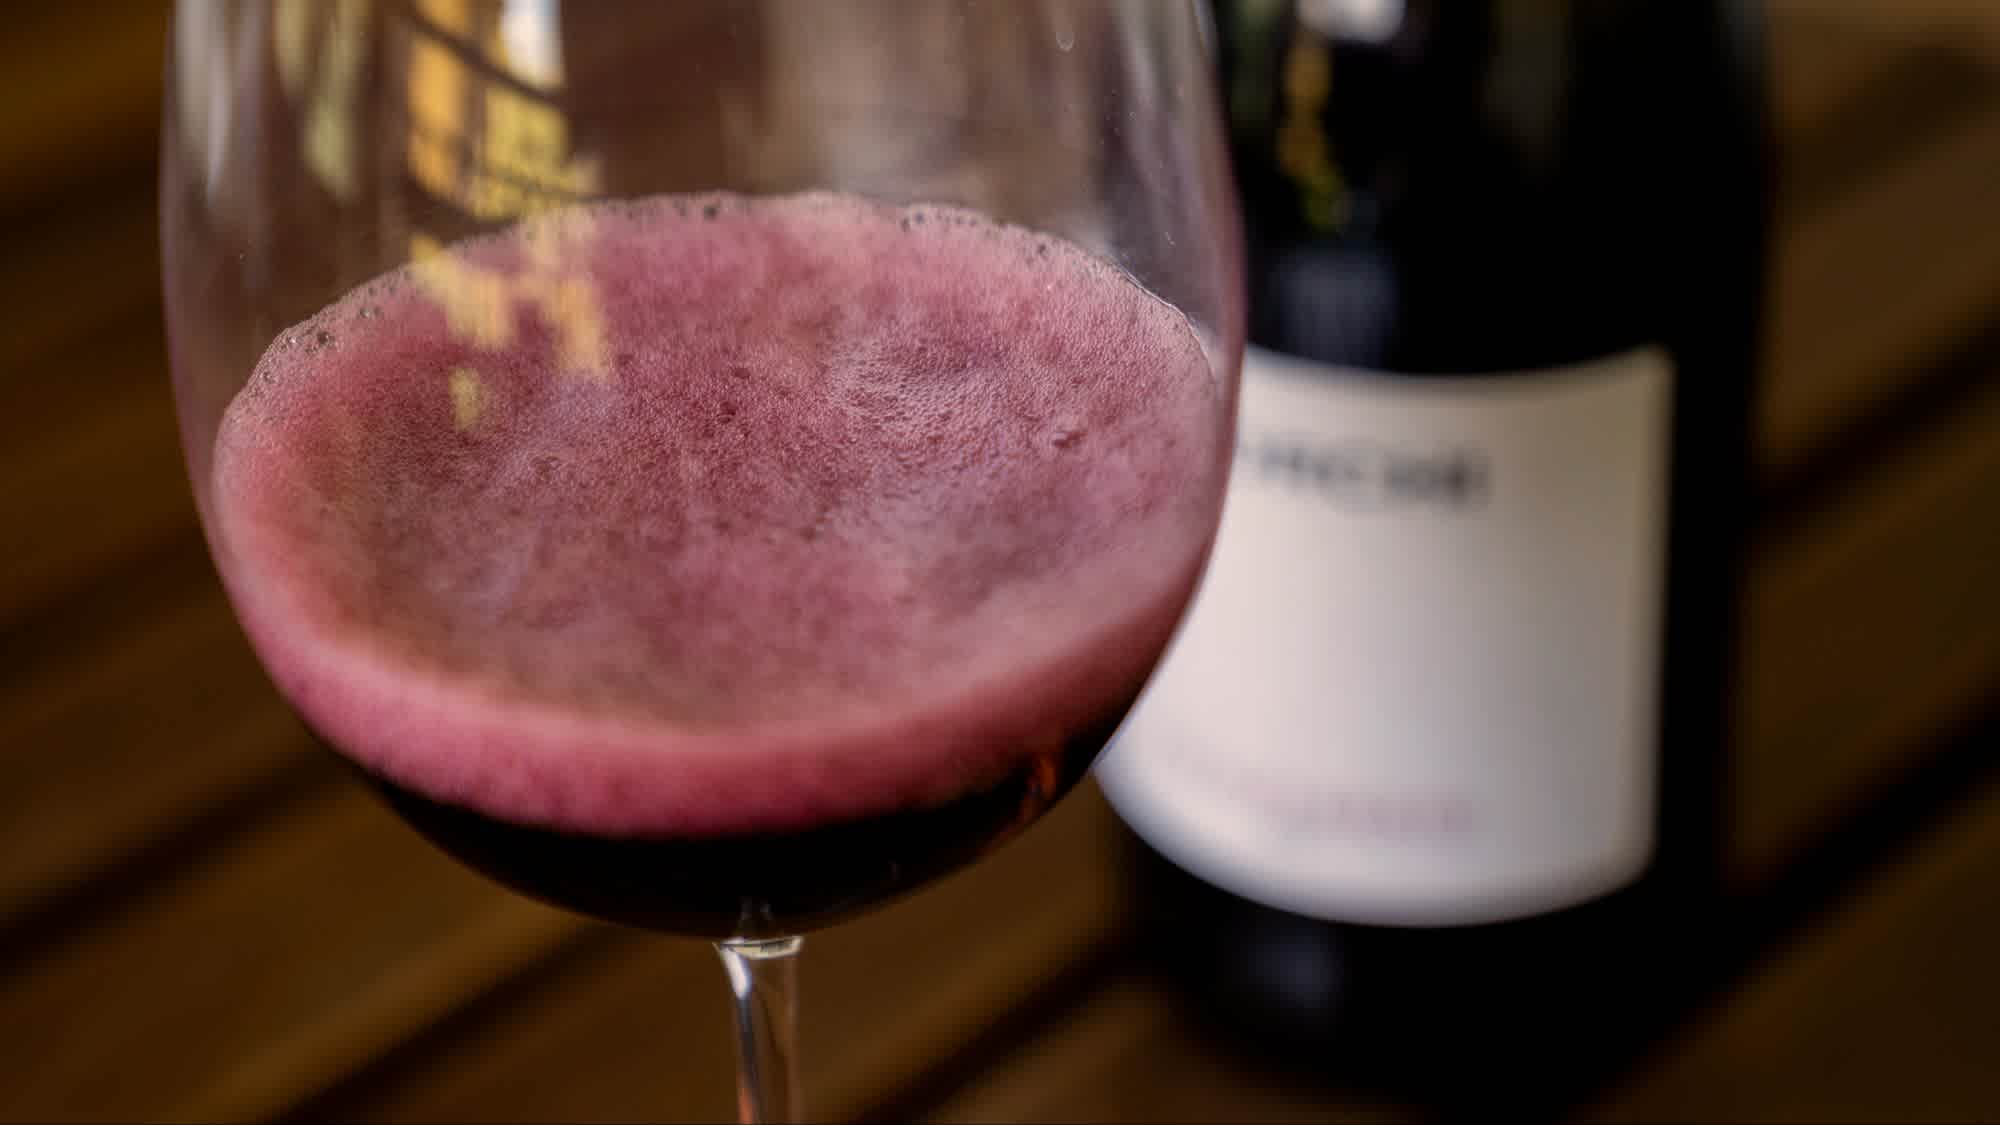 Sparkling red wine – it’s your ‘cooler, more fun friend’